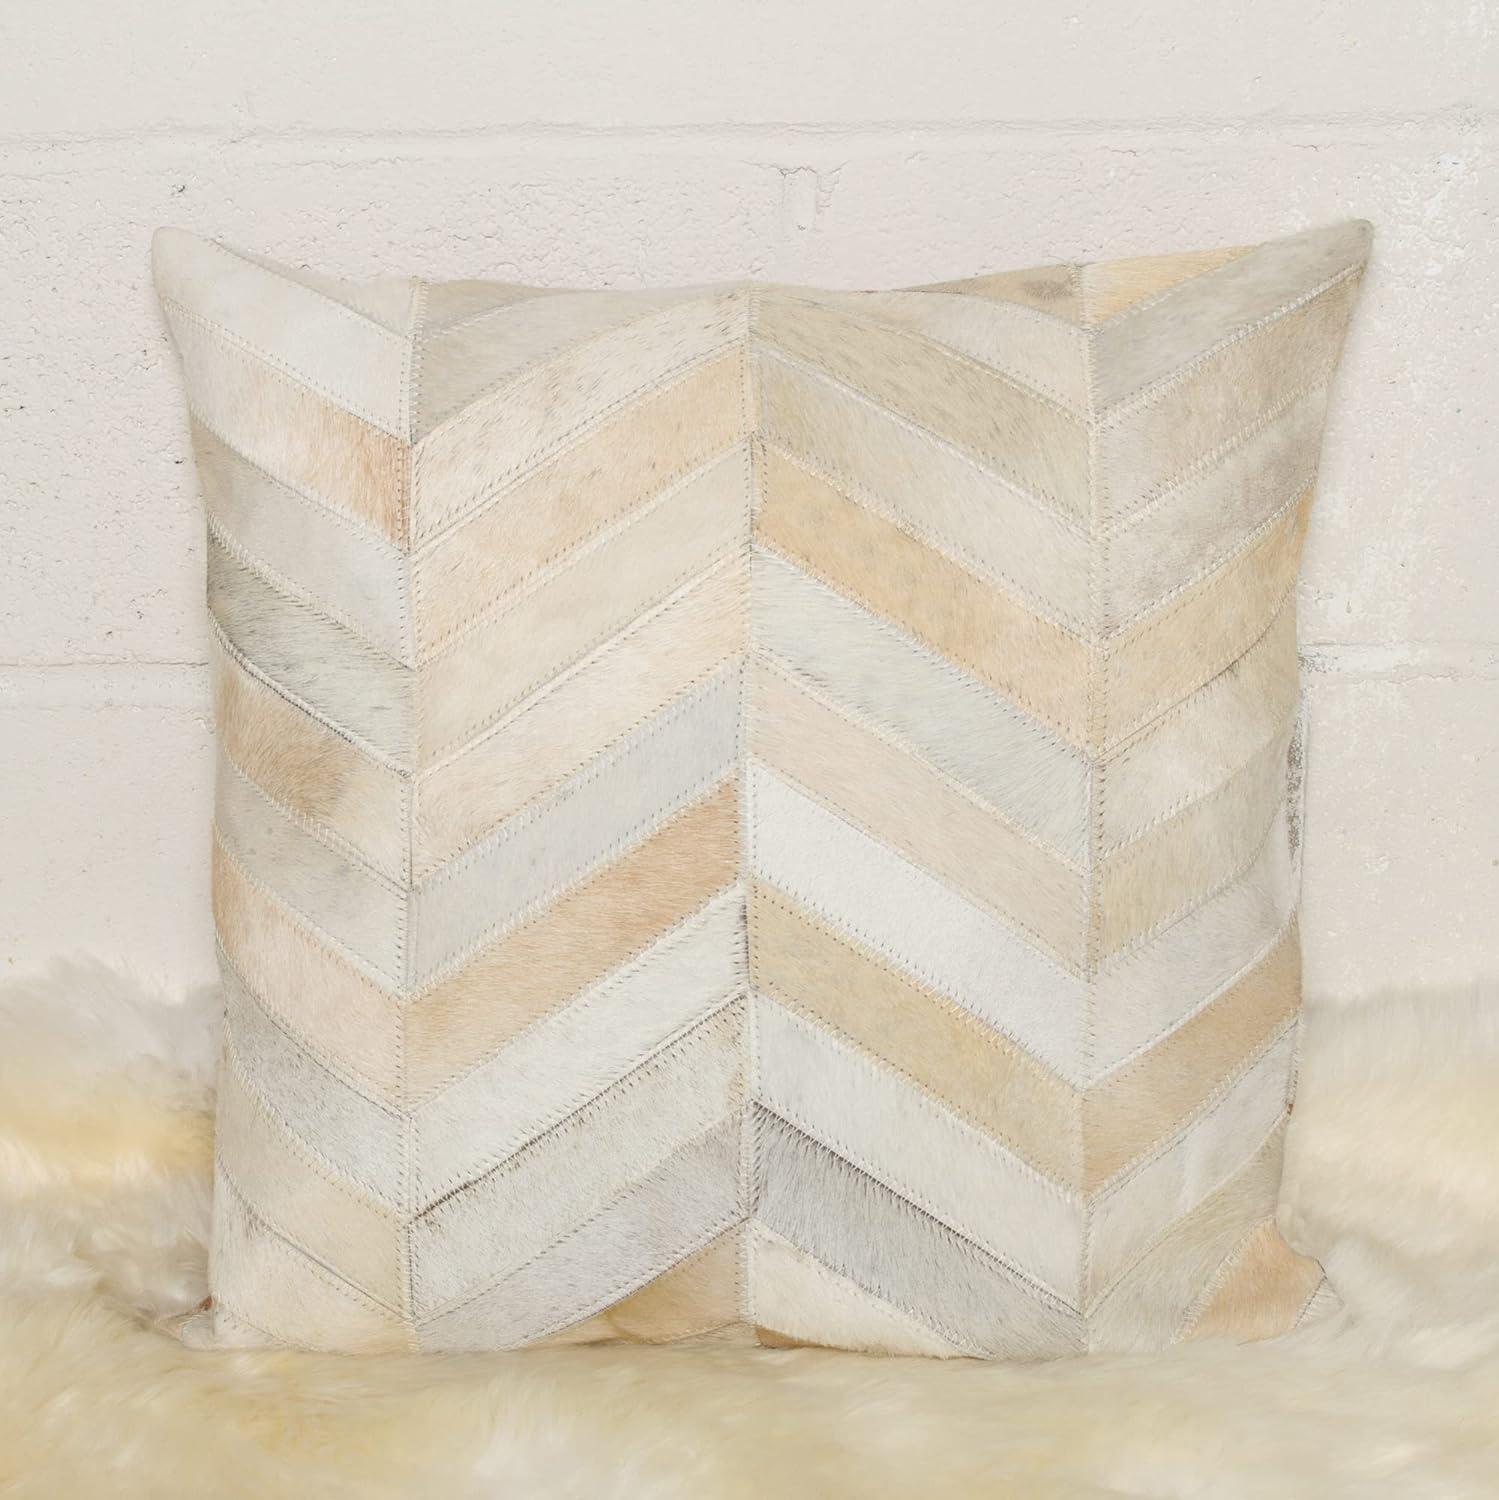 Torino Luxe Chevron Hand-Stitched Cowhide Throw Pillows, Set of 2, Natural 18"x18"